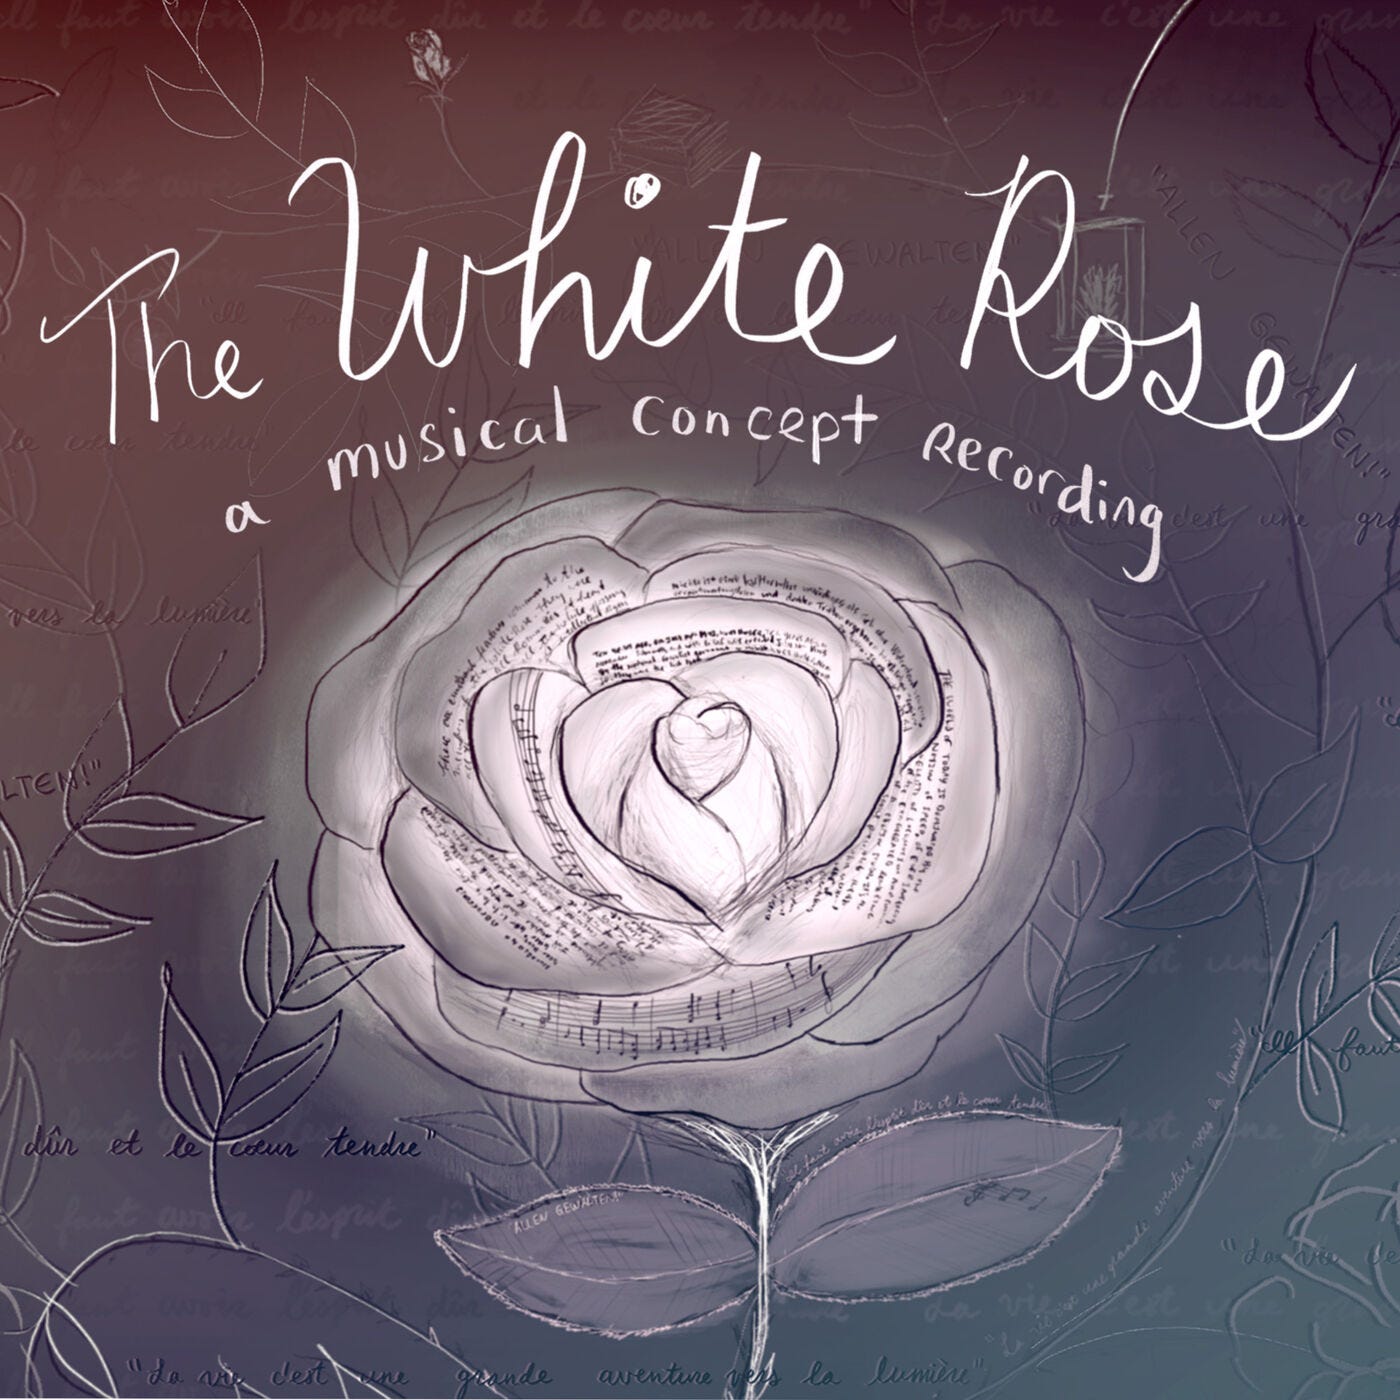 Part 5: The White Rose, a musical concept recording